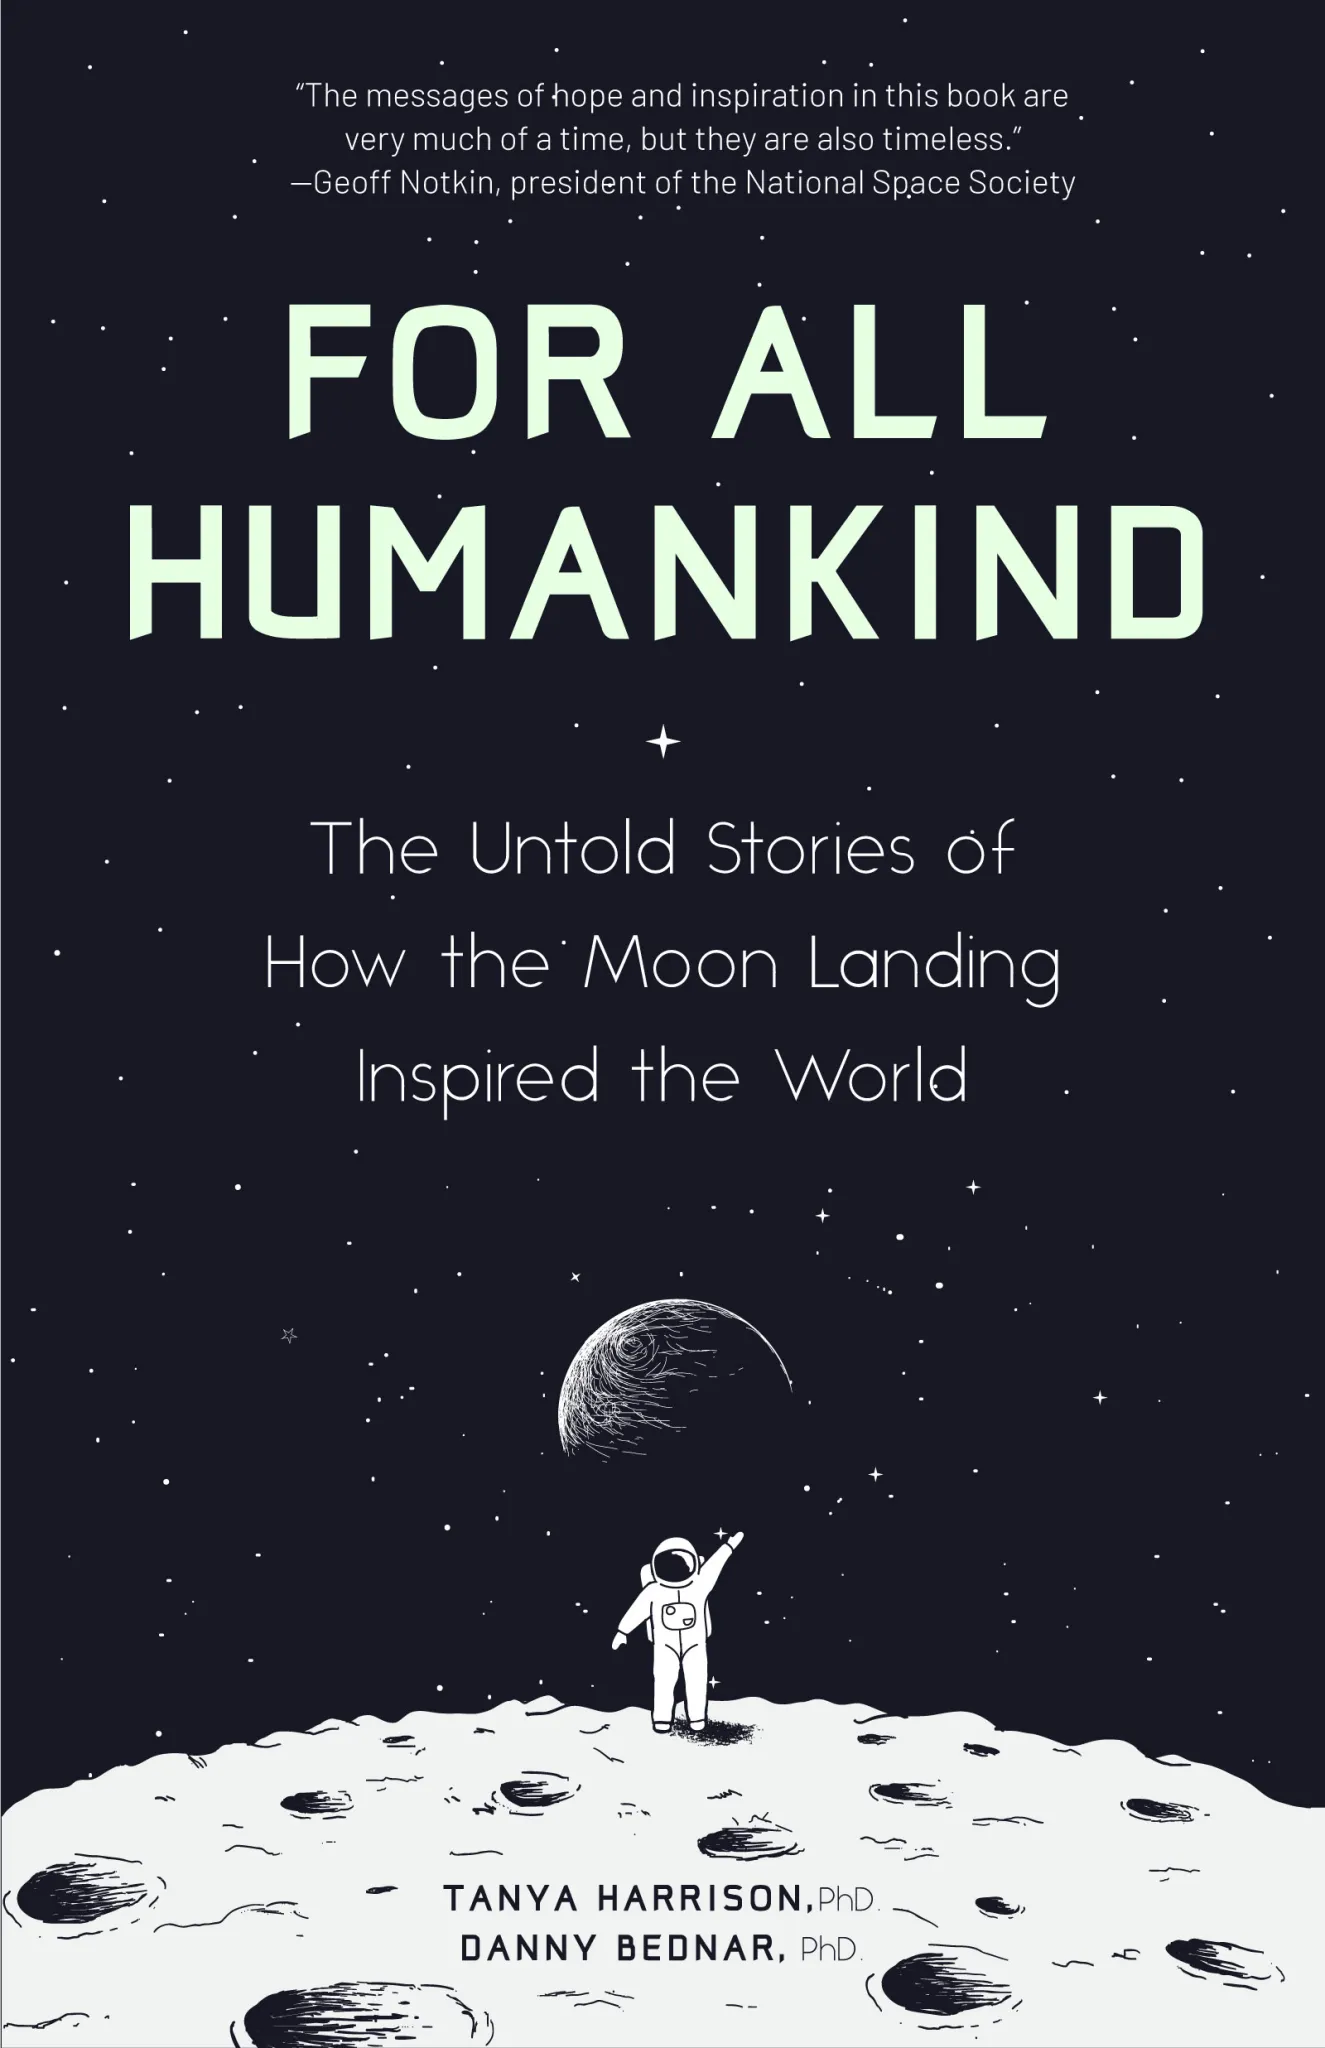 Book cover: For All Humankind by Dr. Tanya Harrison. Illustration of an astronaut, waving from the surface of the moon, with the earth behind